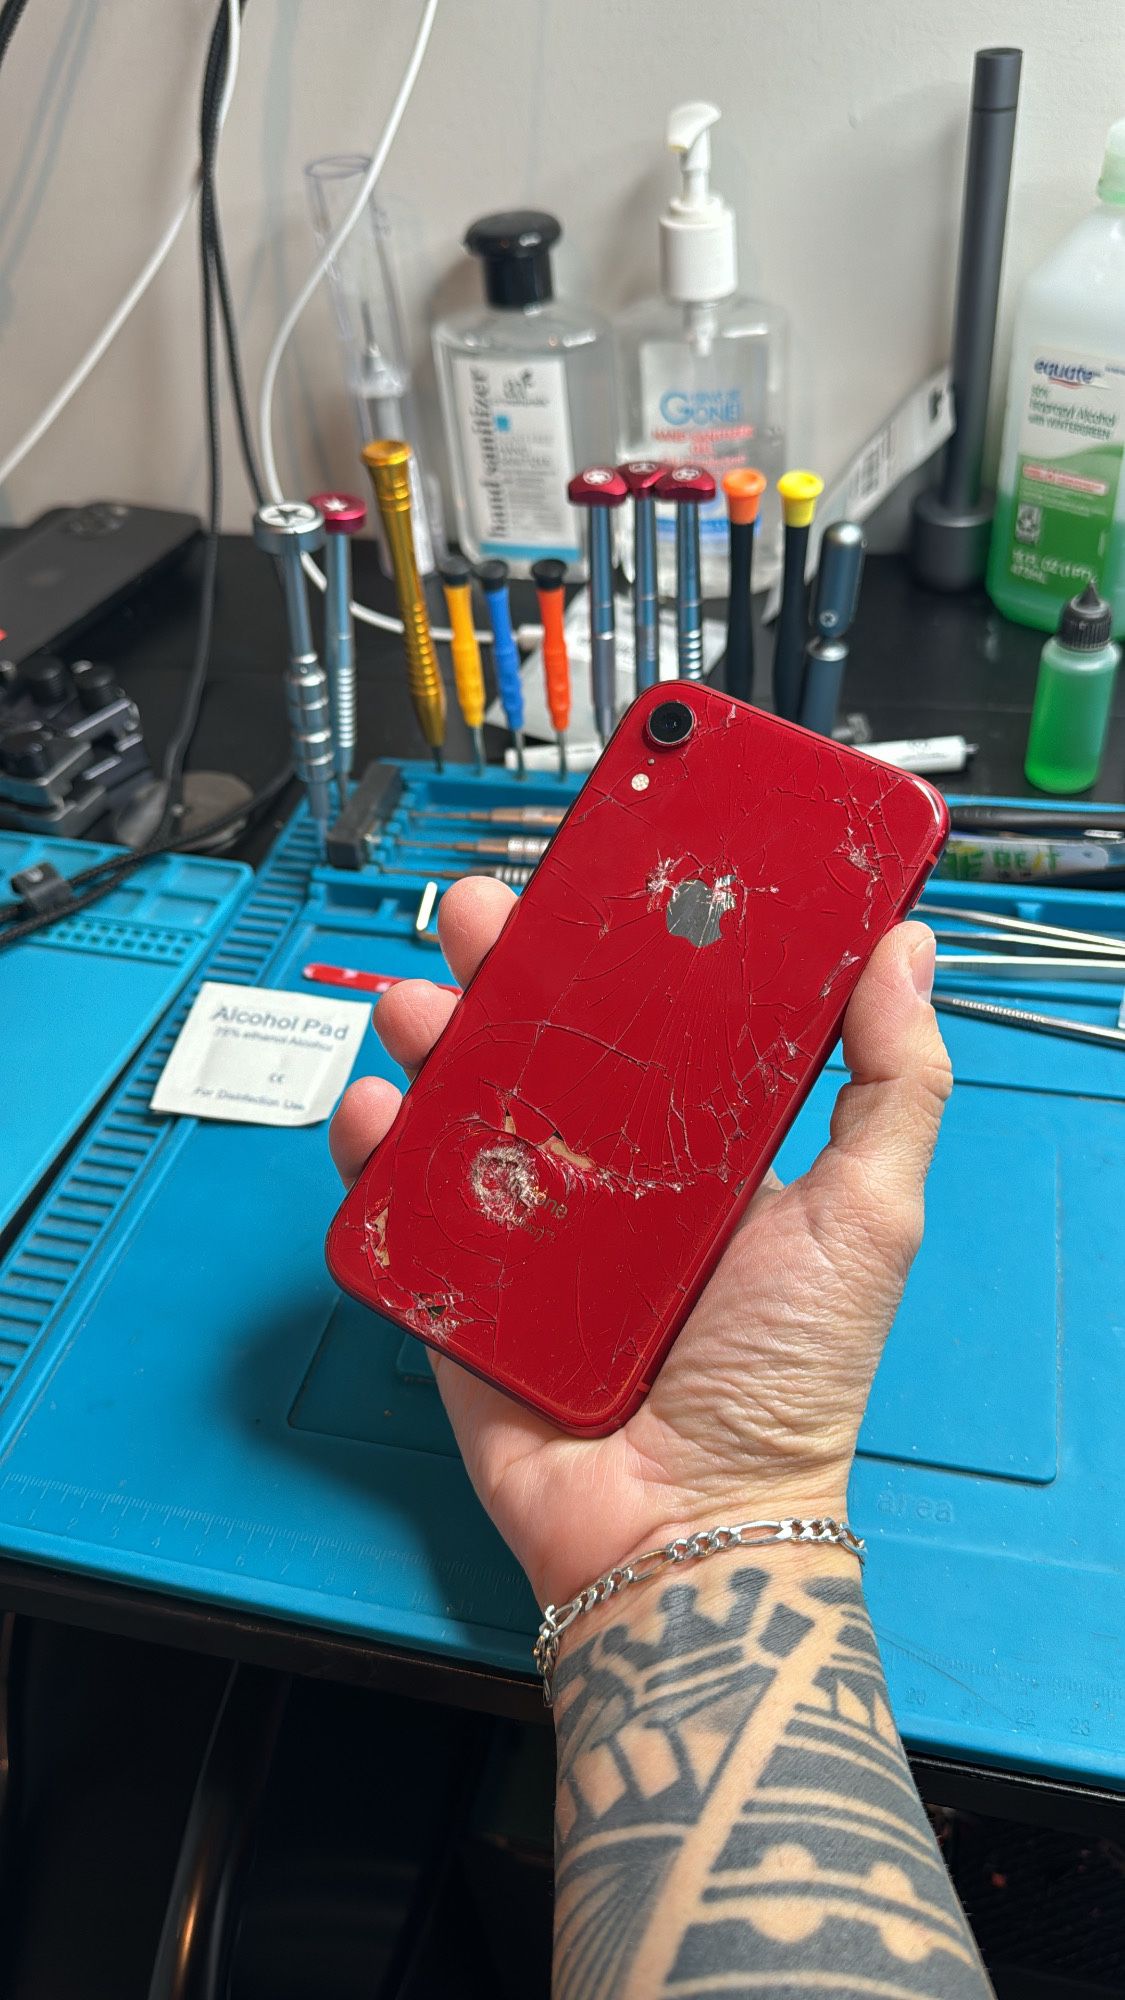 Iphone XR Back Glass Replacement $25